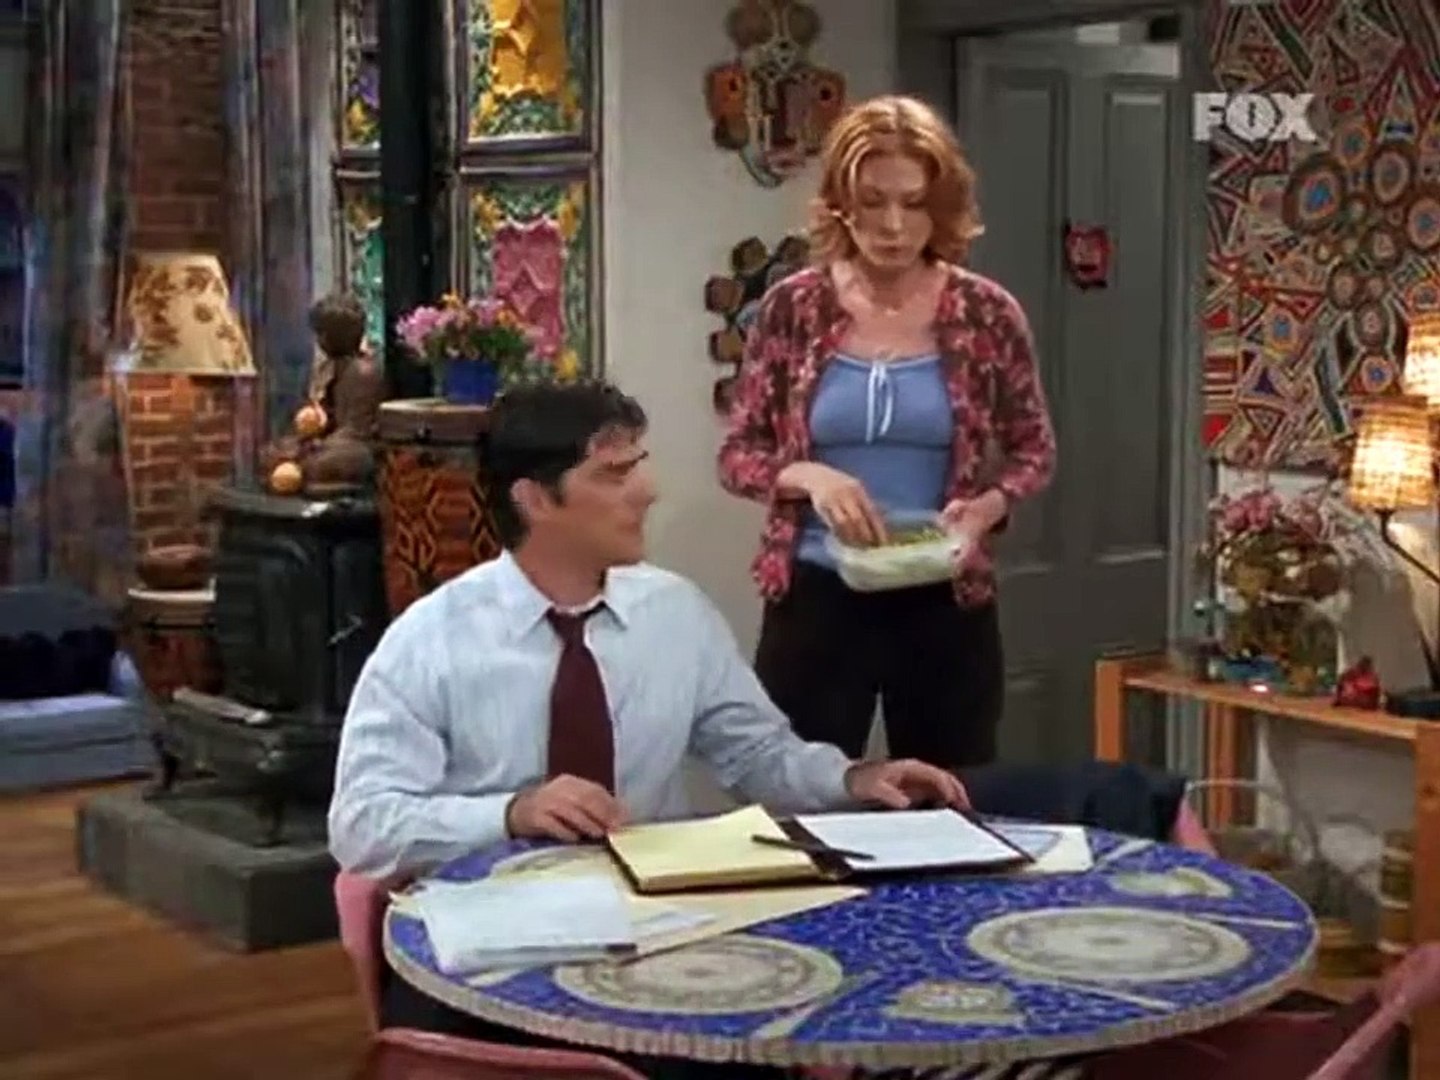 Dharma & Greg 4x12 - "Let's Get Fiscal" - video Dailymotion